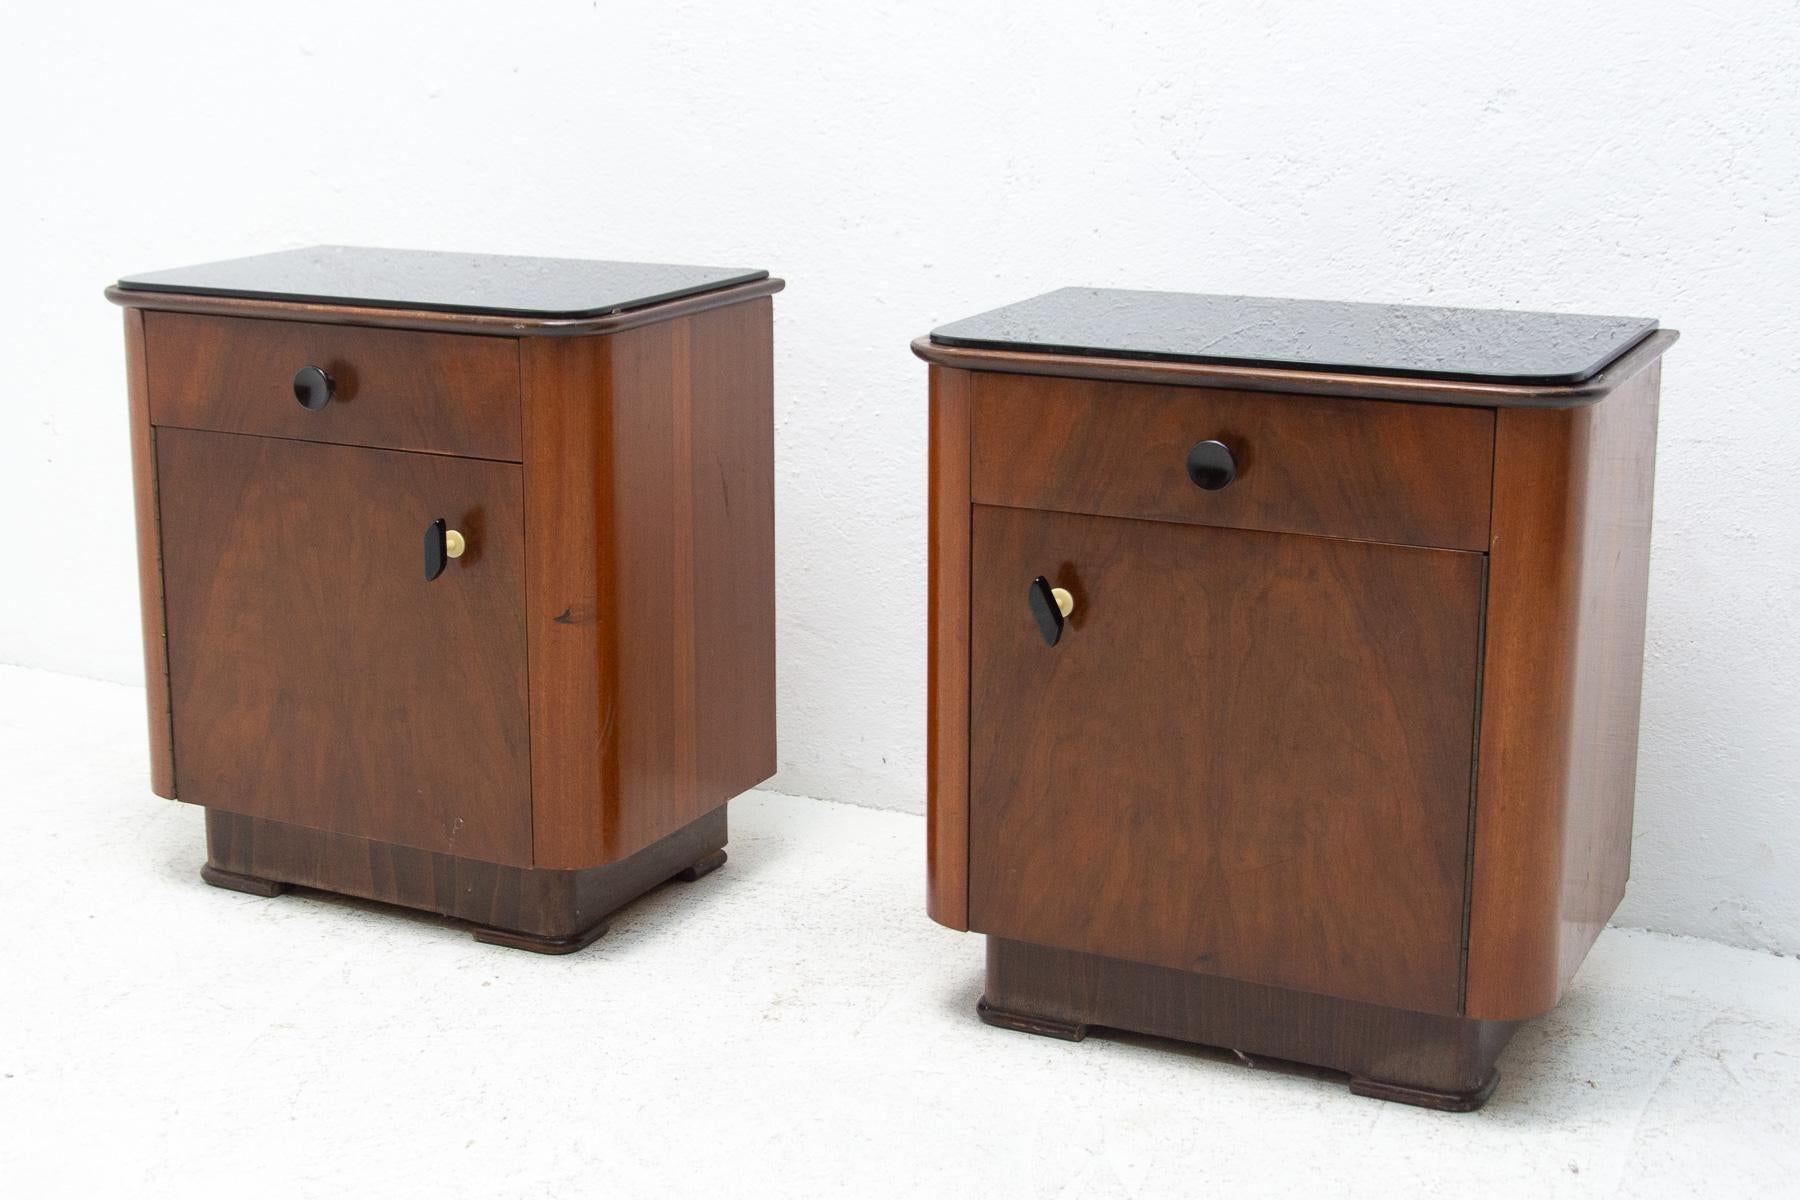 These night stands were made by UP Zavody in the former Czechoslovakia in the 1960´s. They are made of walnut wood and black opaque glass on the top. The stands are in good Vintage condition, bears signs of age and using. Price is for the